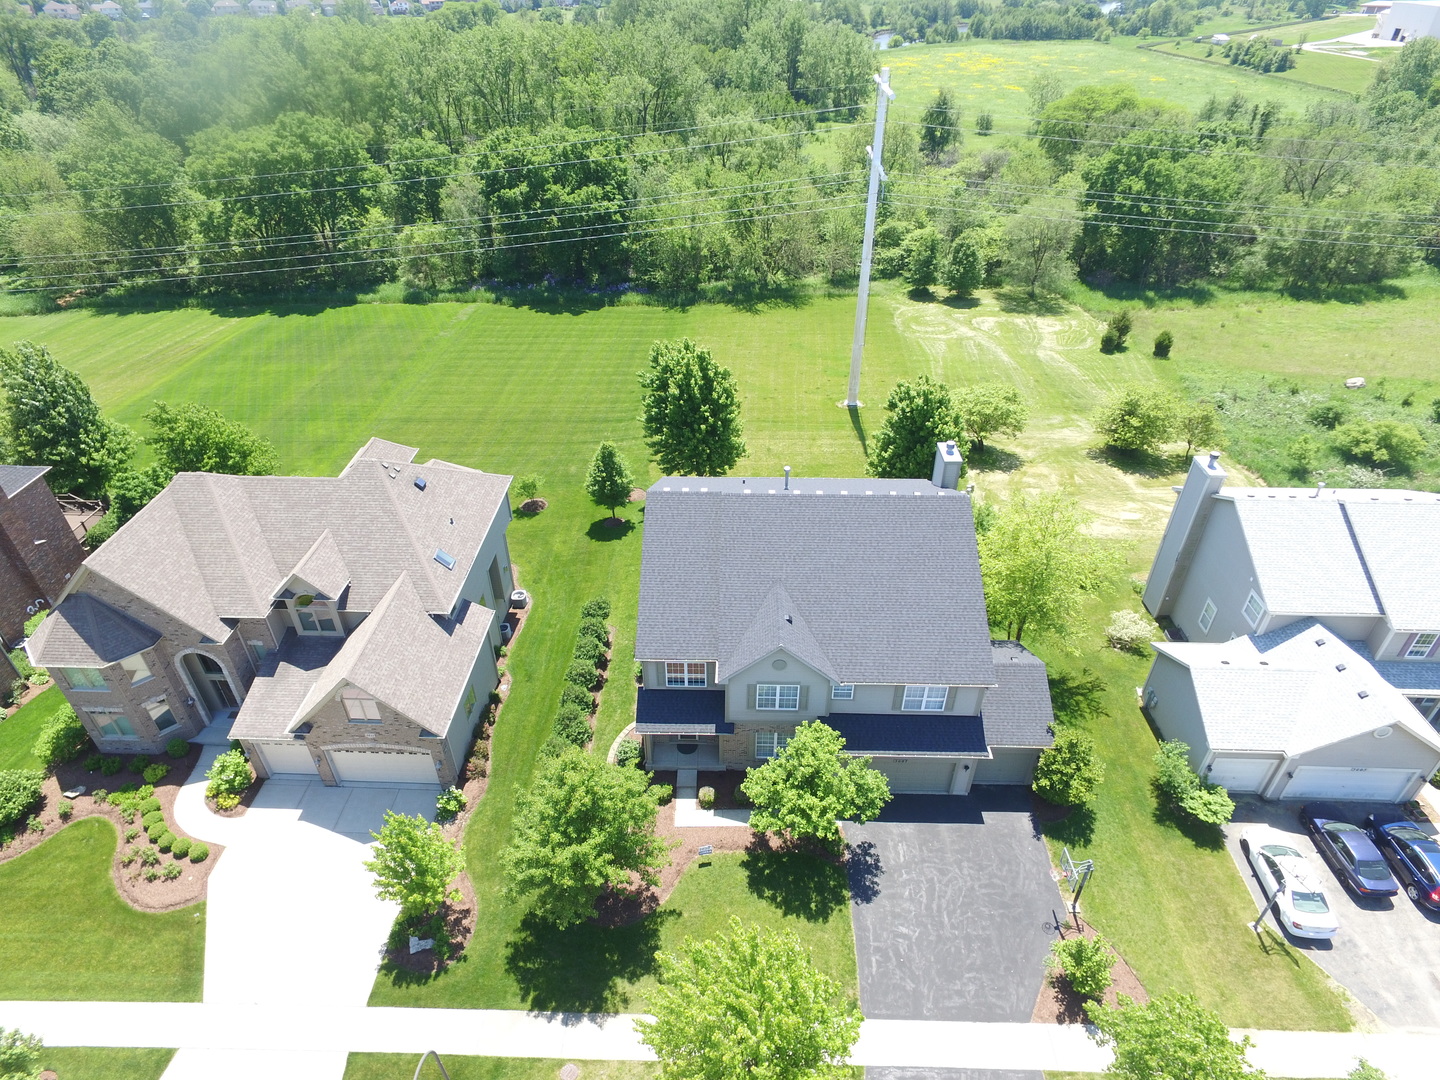 an aerial view of a house with garden space and outdoor seating